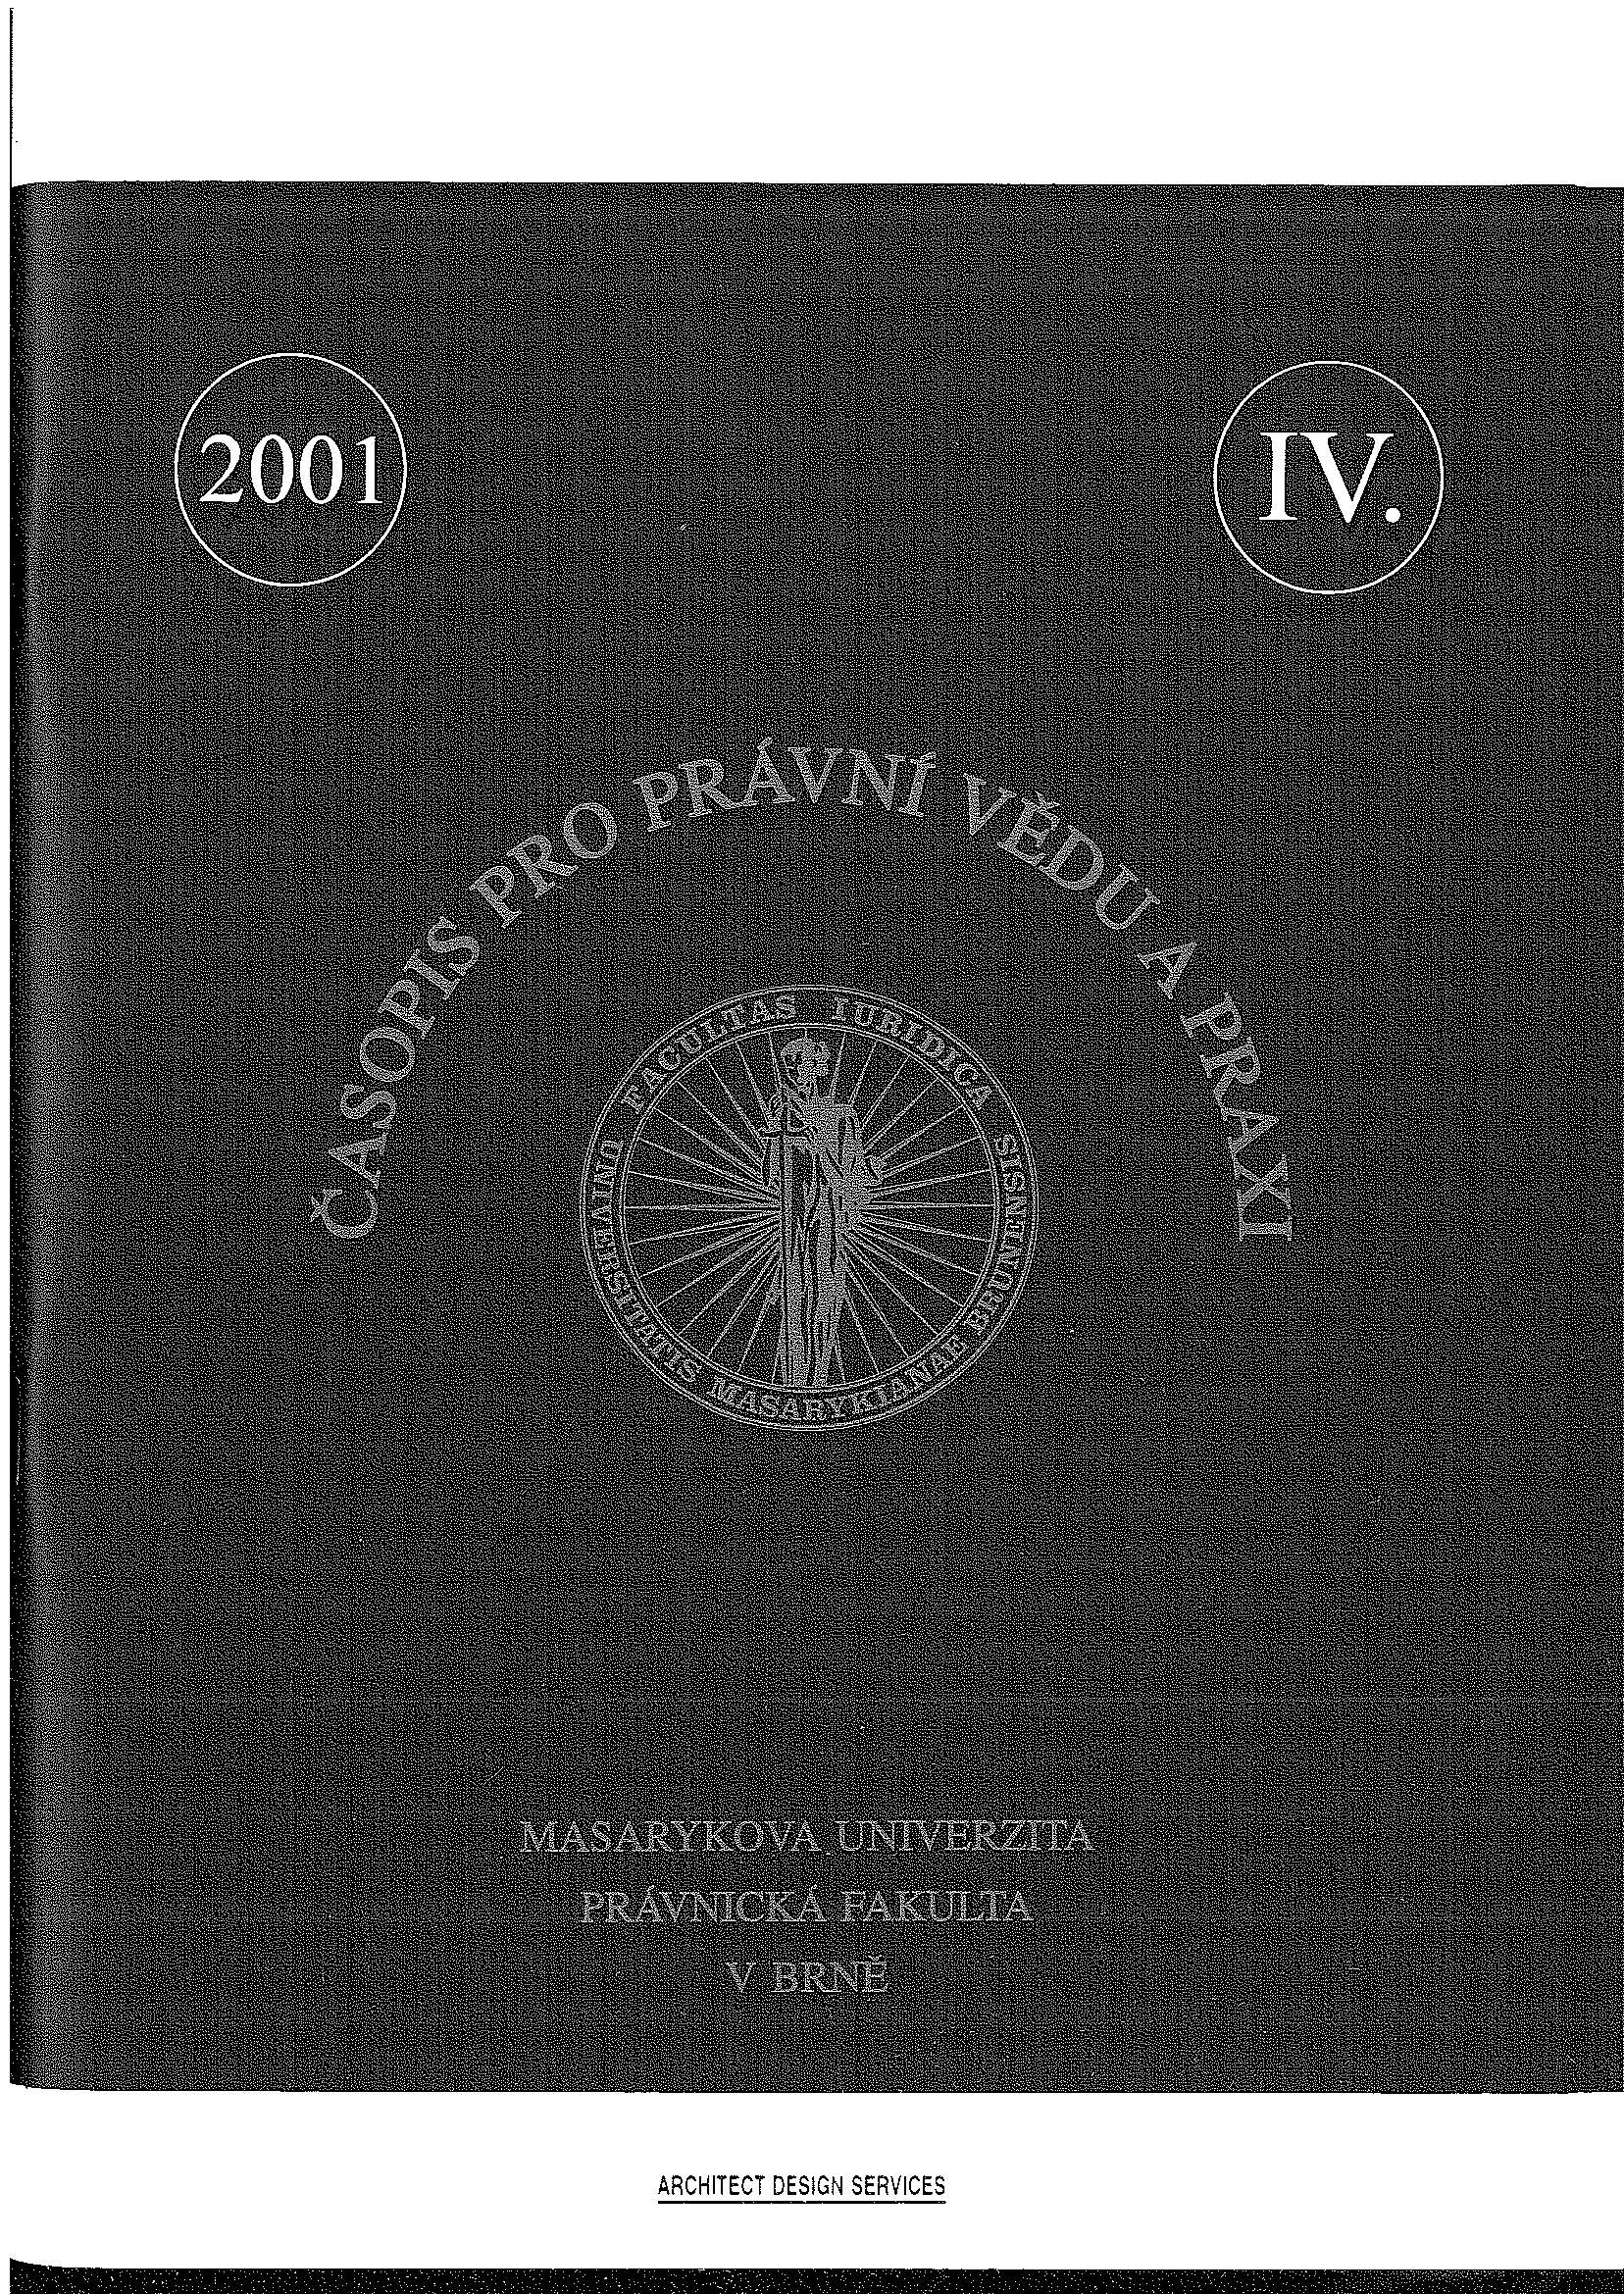 British stock corporation corresponding to the Czech limited liability company Cover Image